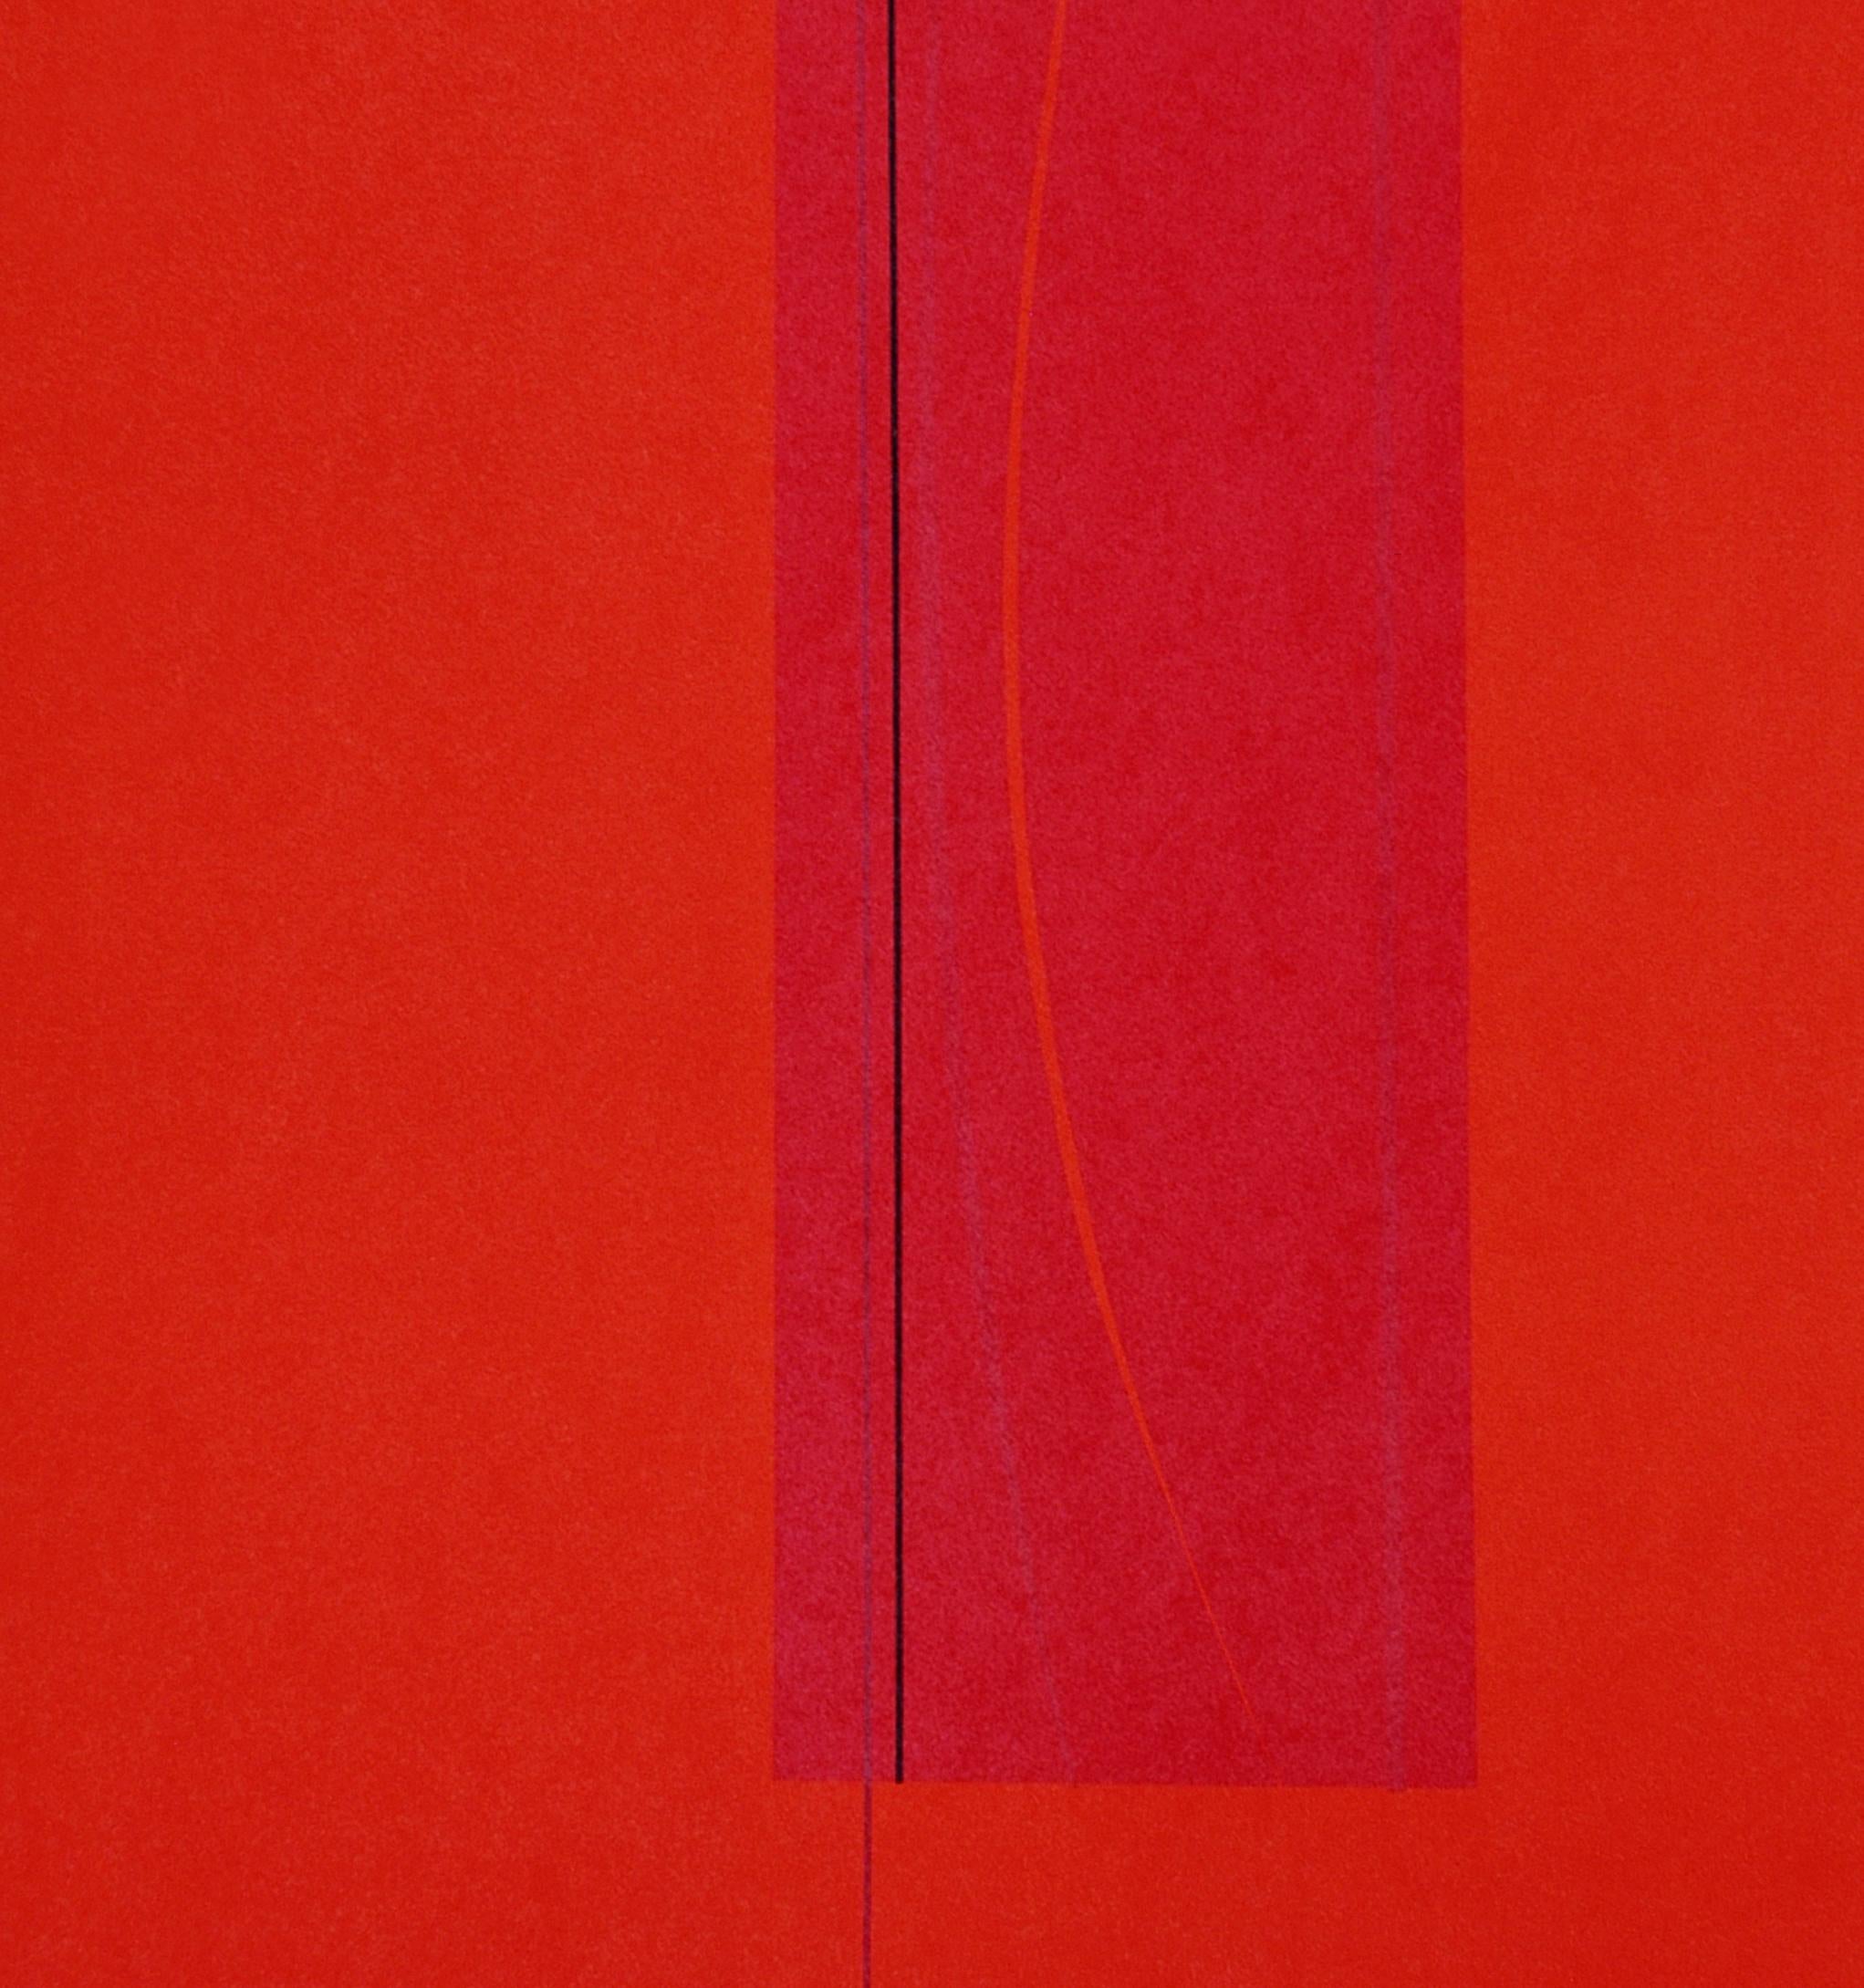 Red Six - Lithograph by Lorenzo Indrimi - 1970 ca. 1